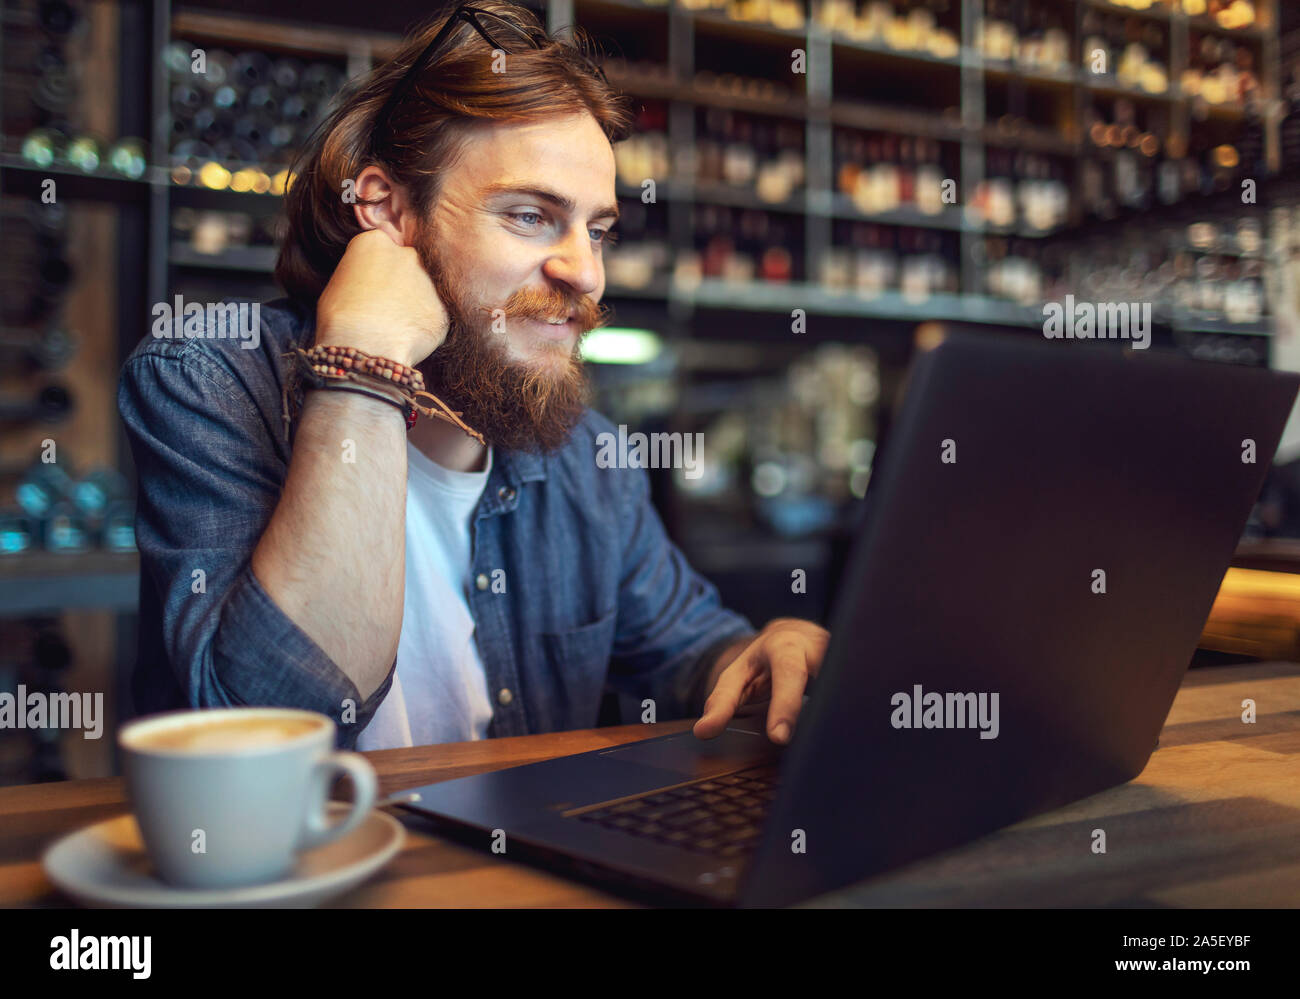 Contented smiling bearded lad working by laptop in a bar Stock Photo